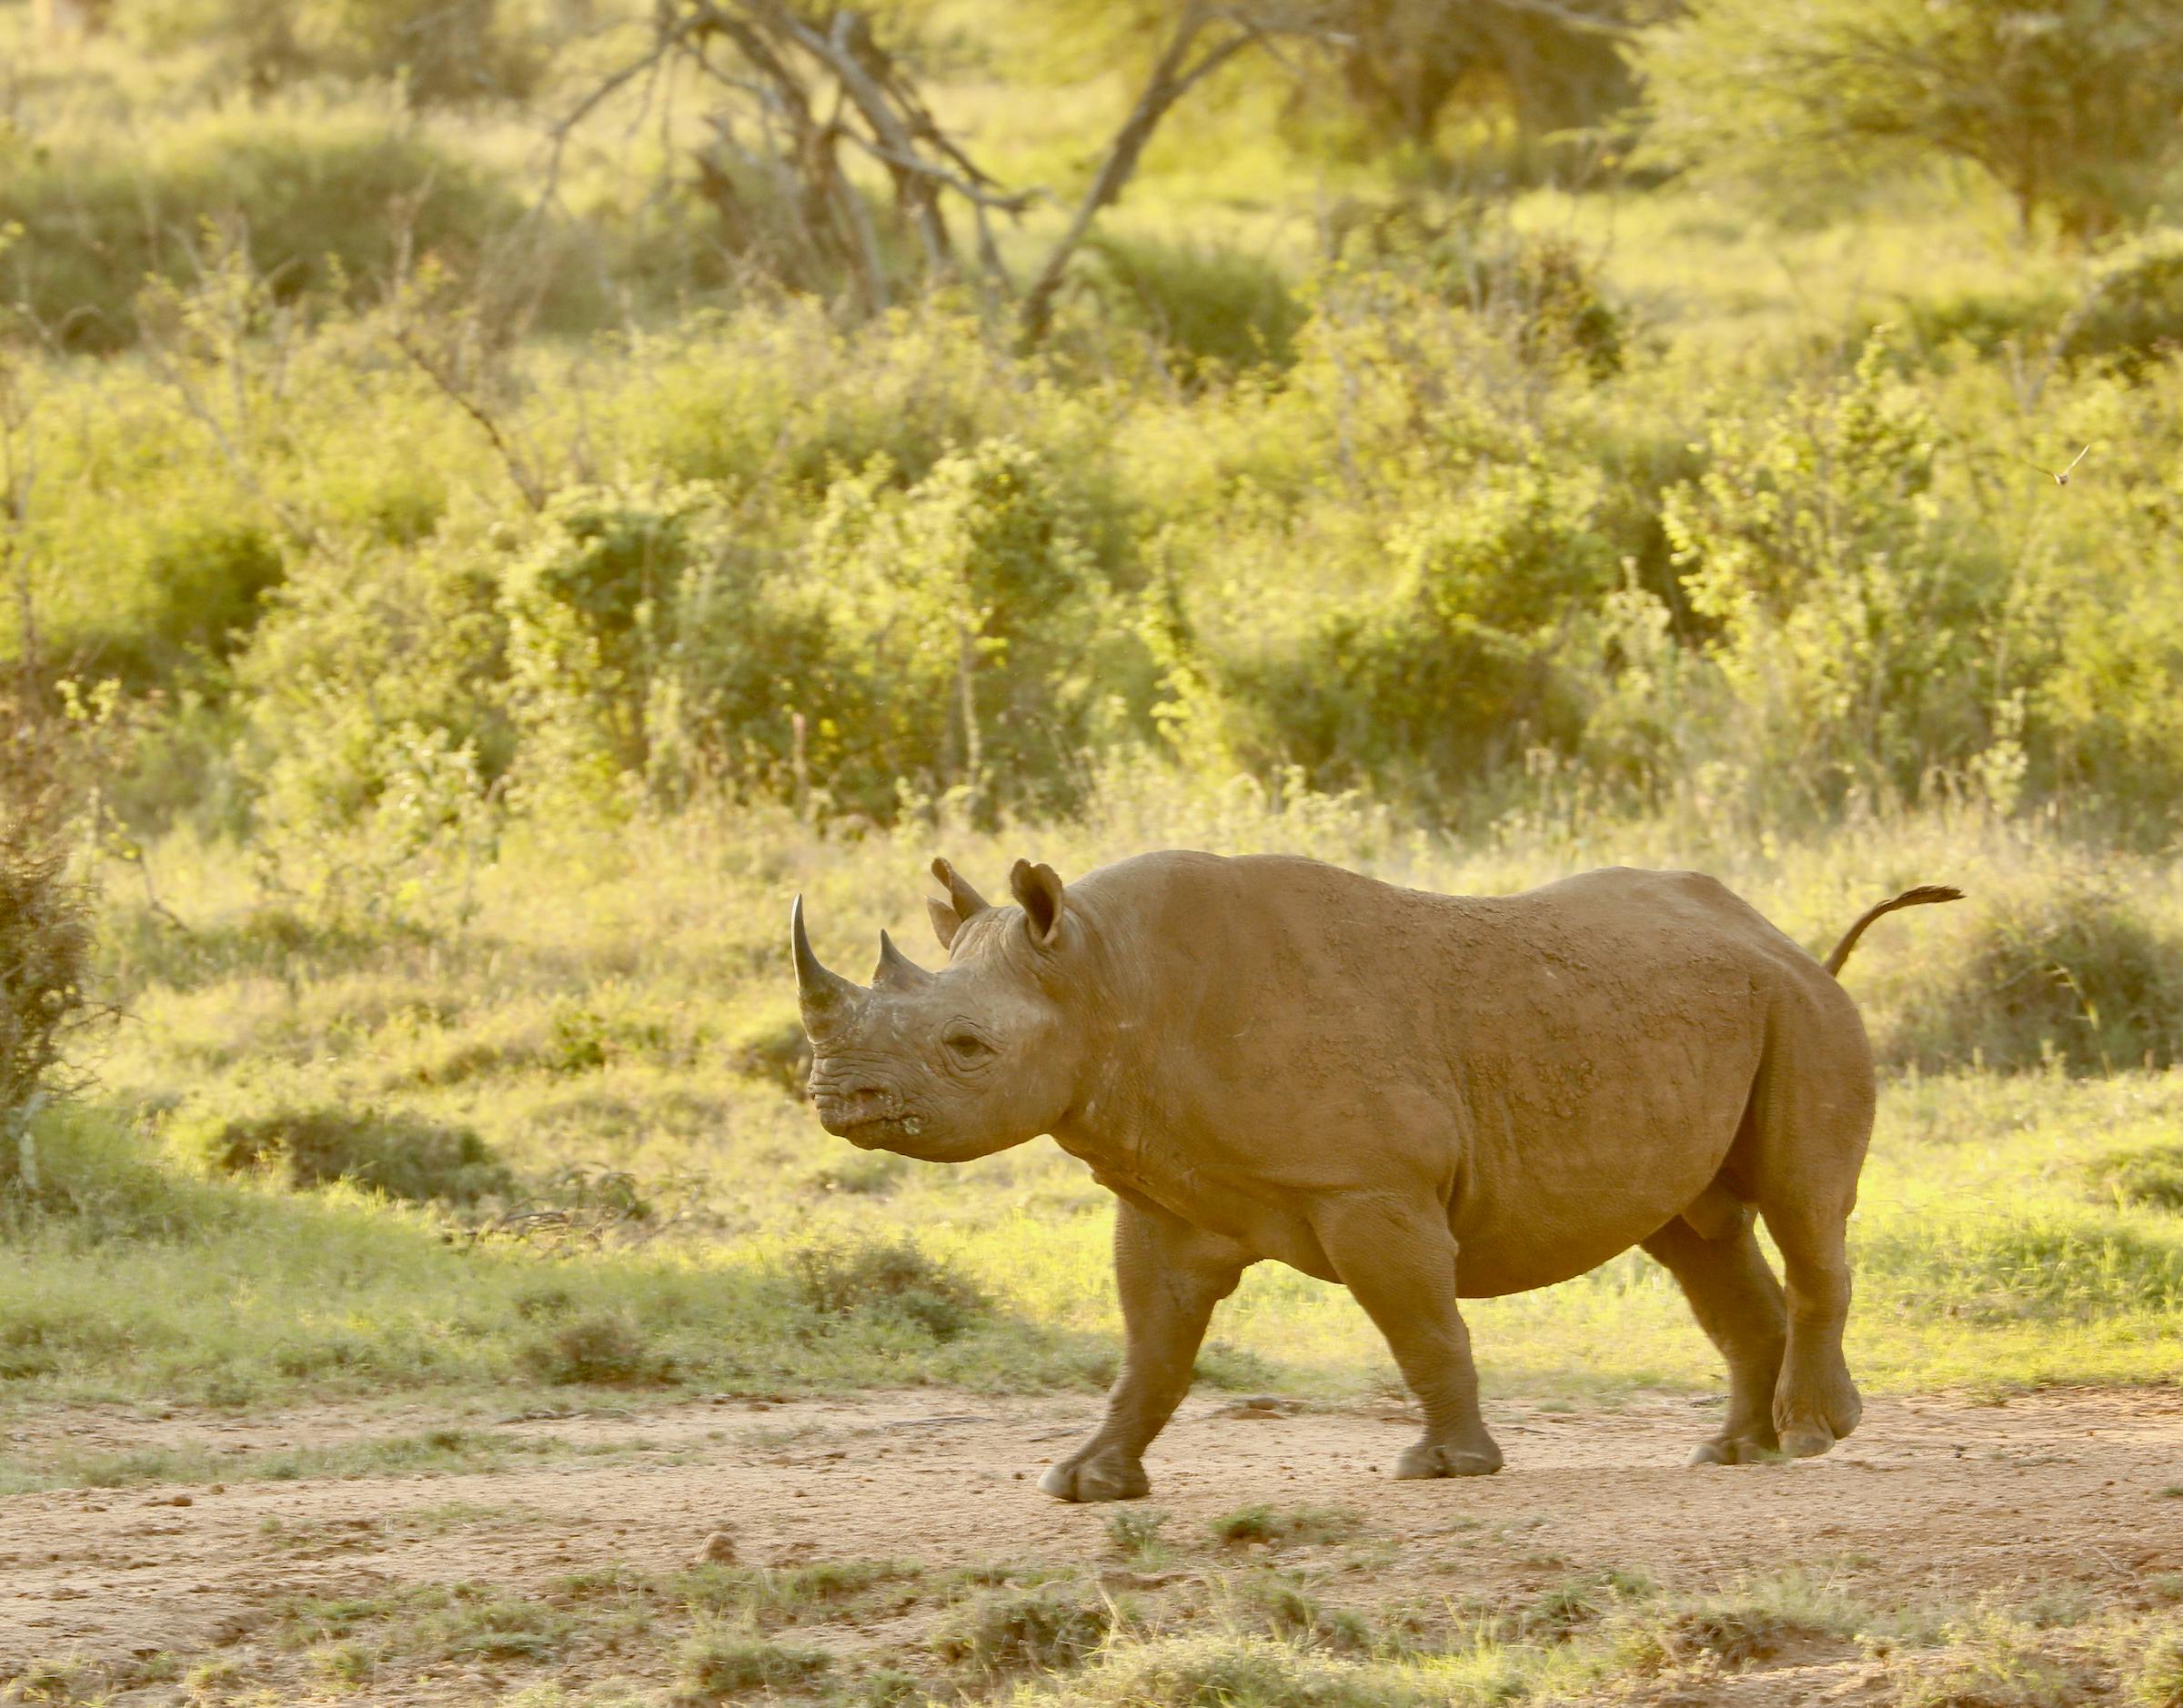 Providing Additional Protection and Support for Black Rhino Conservation